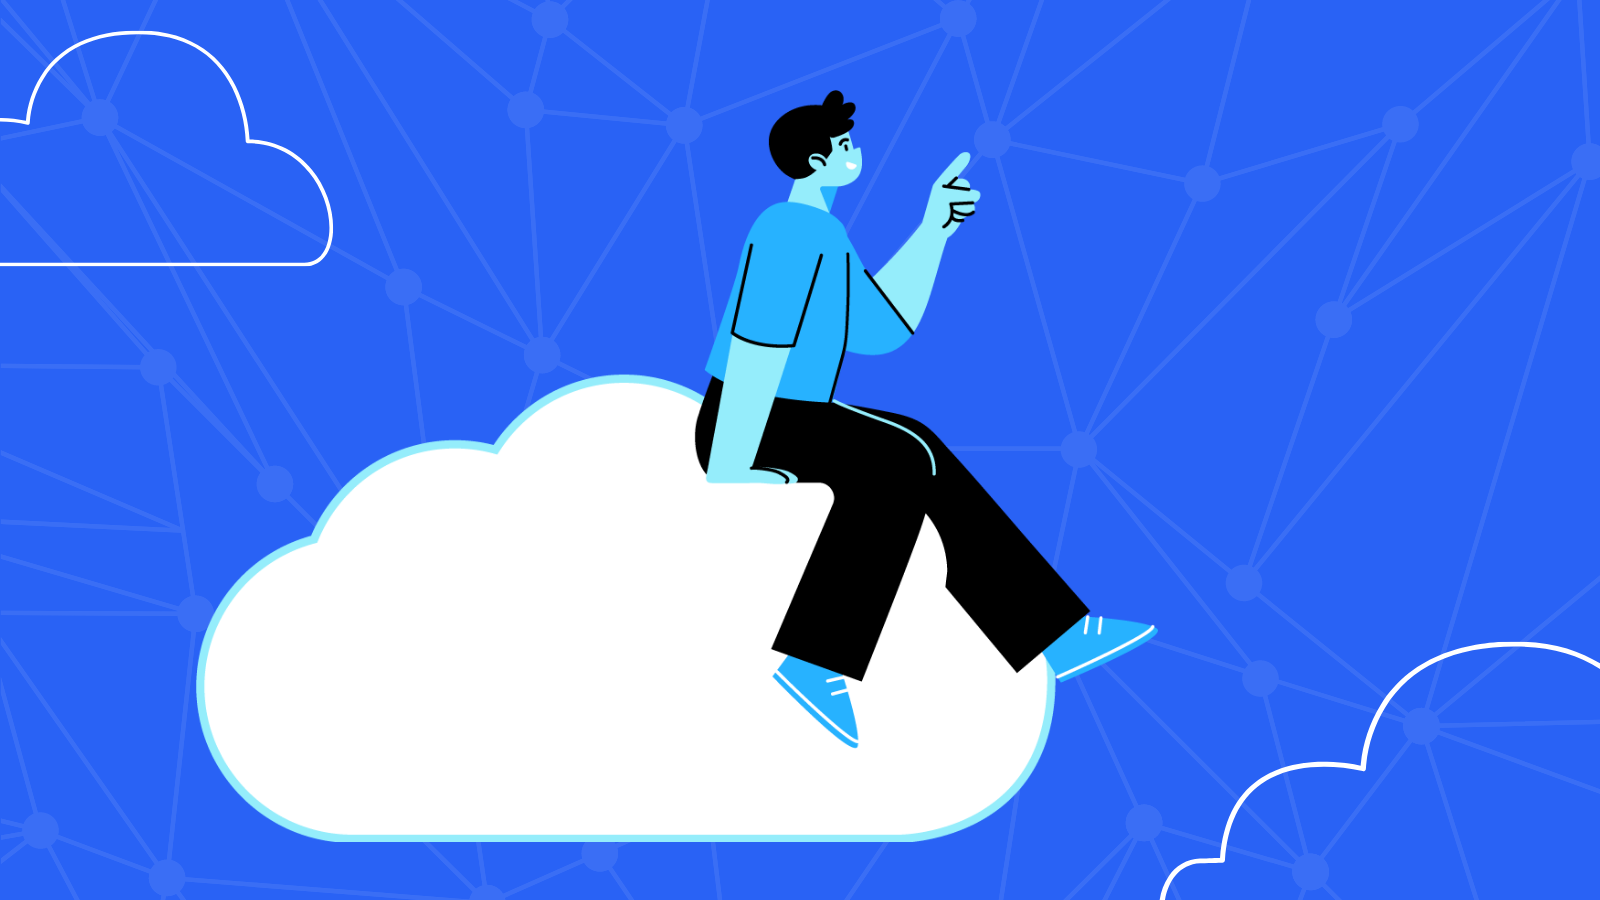 Image from the blog post, "Expand Enterprise Operations with Digital Experience Cloud 10.1."